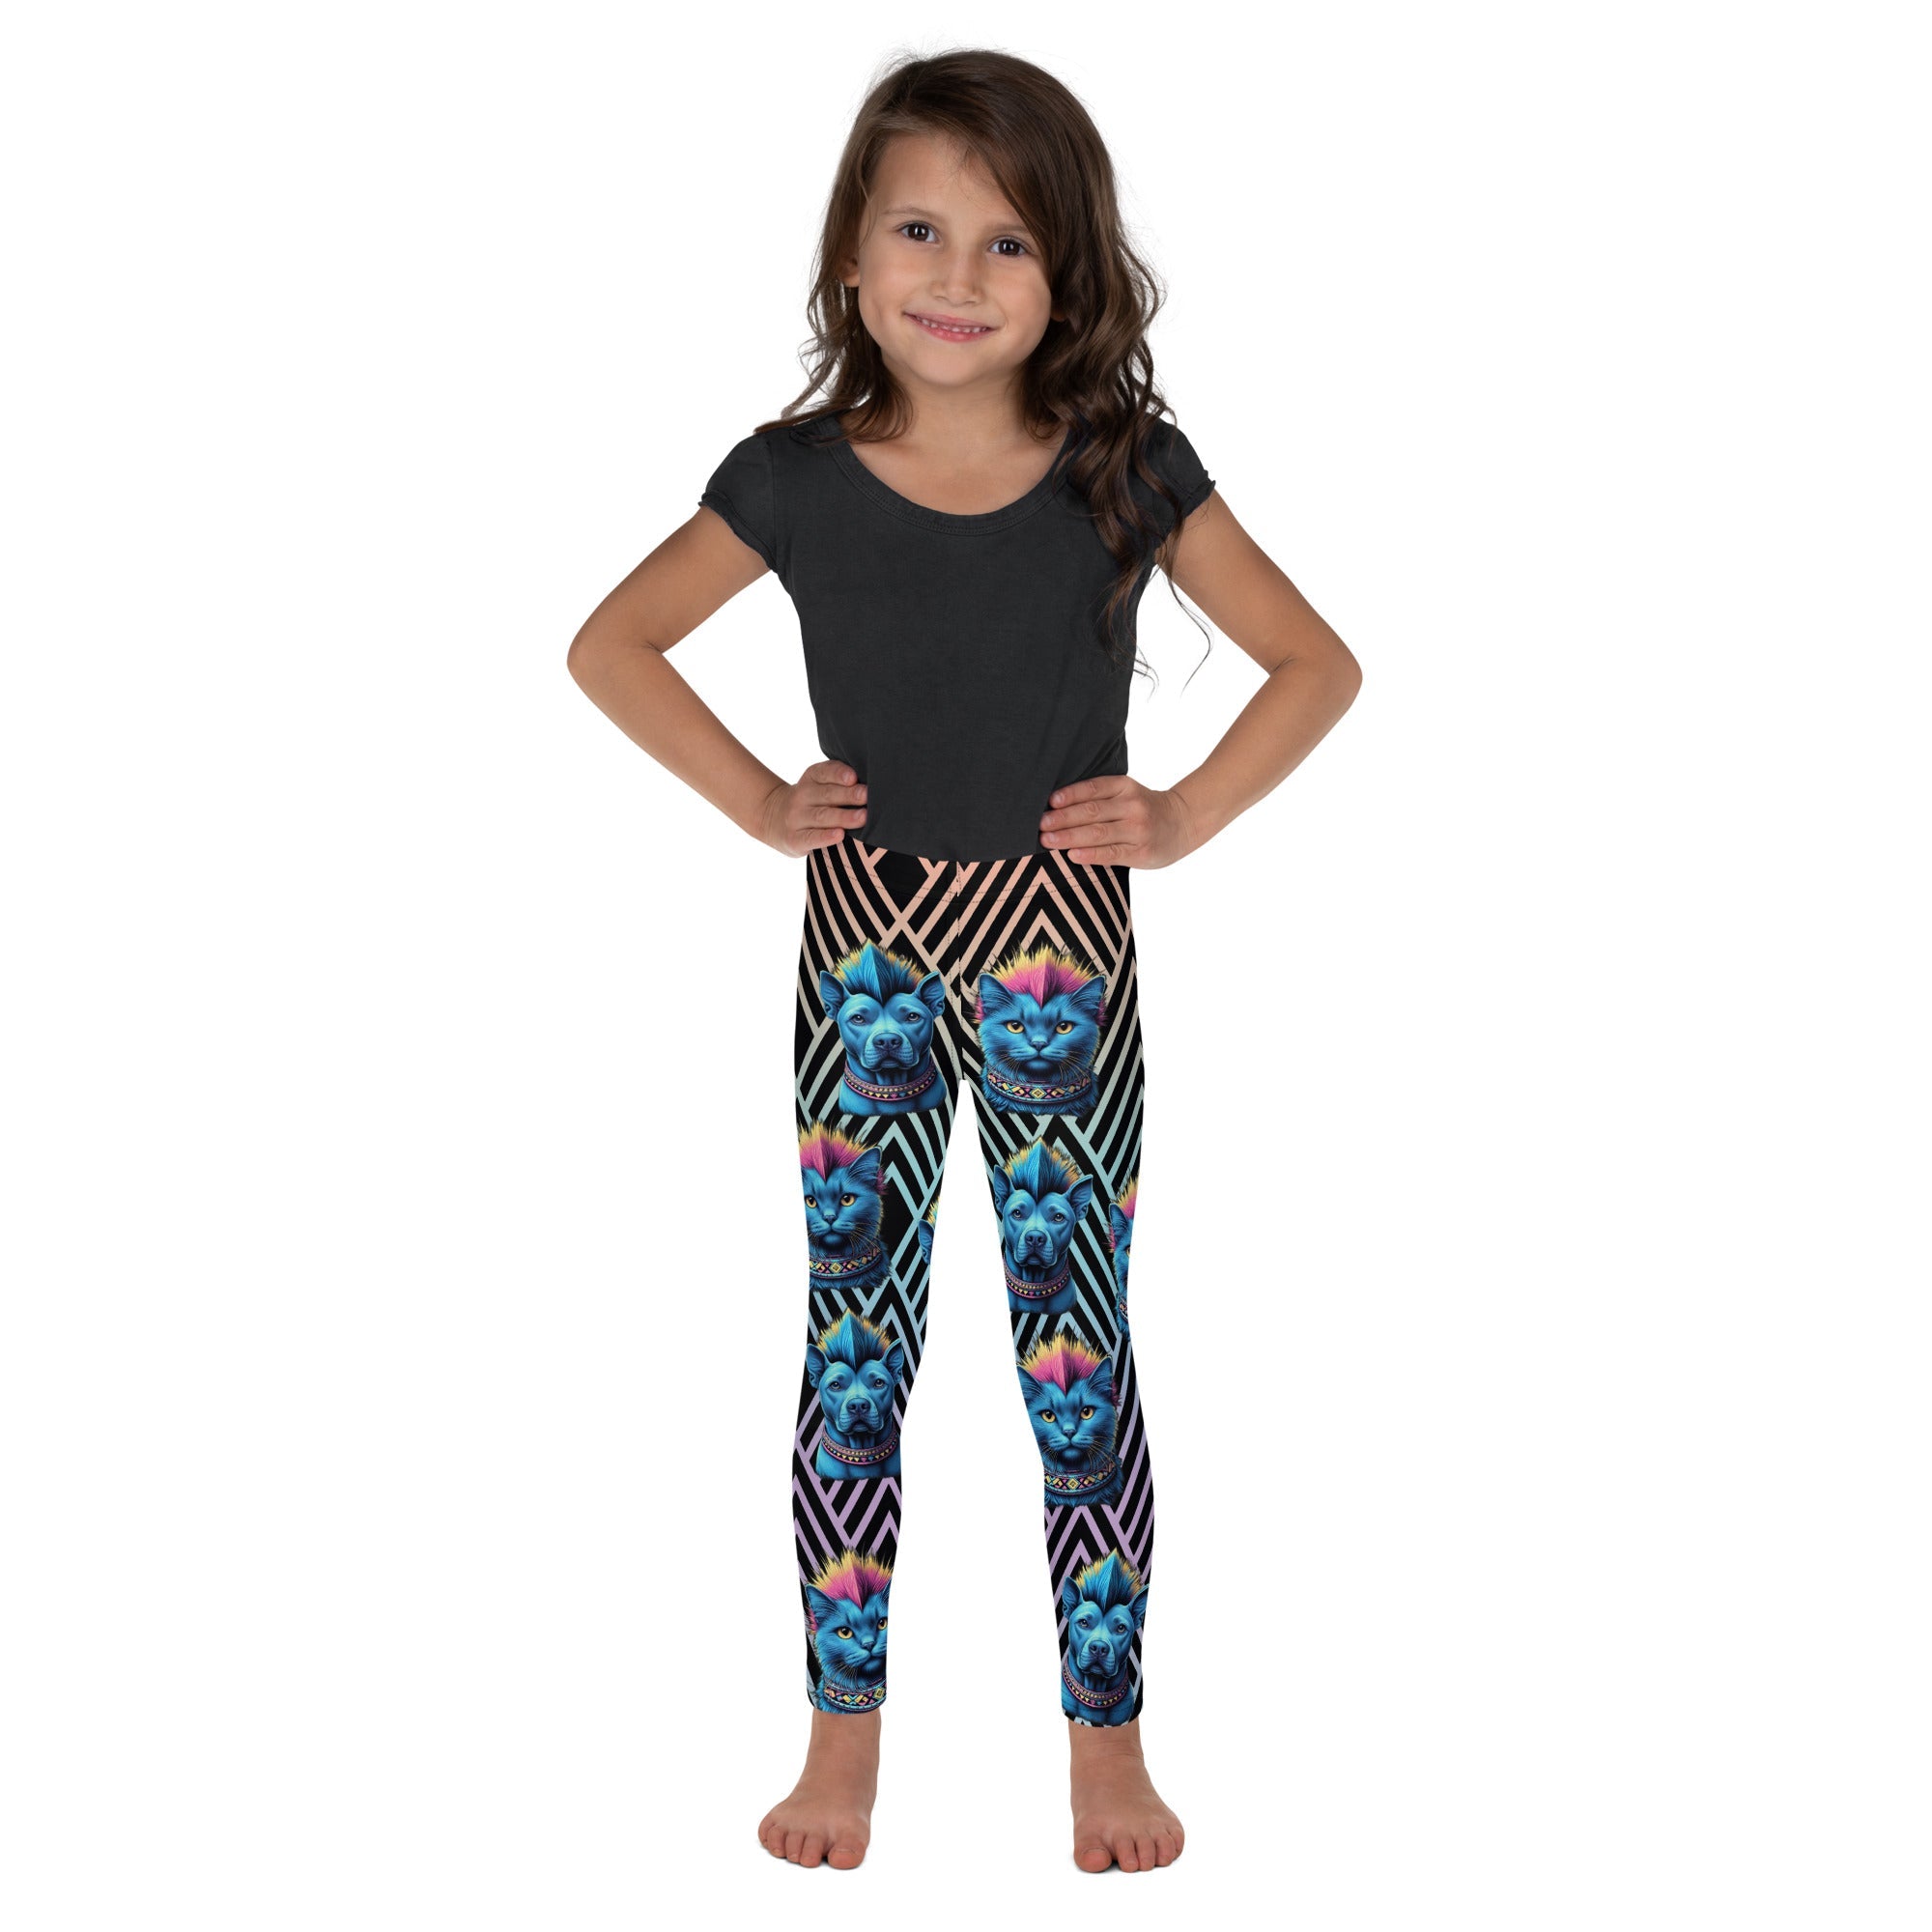 Find Comfy and Adorable Kid's Leggings Online